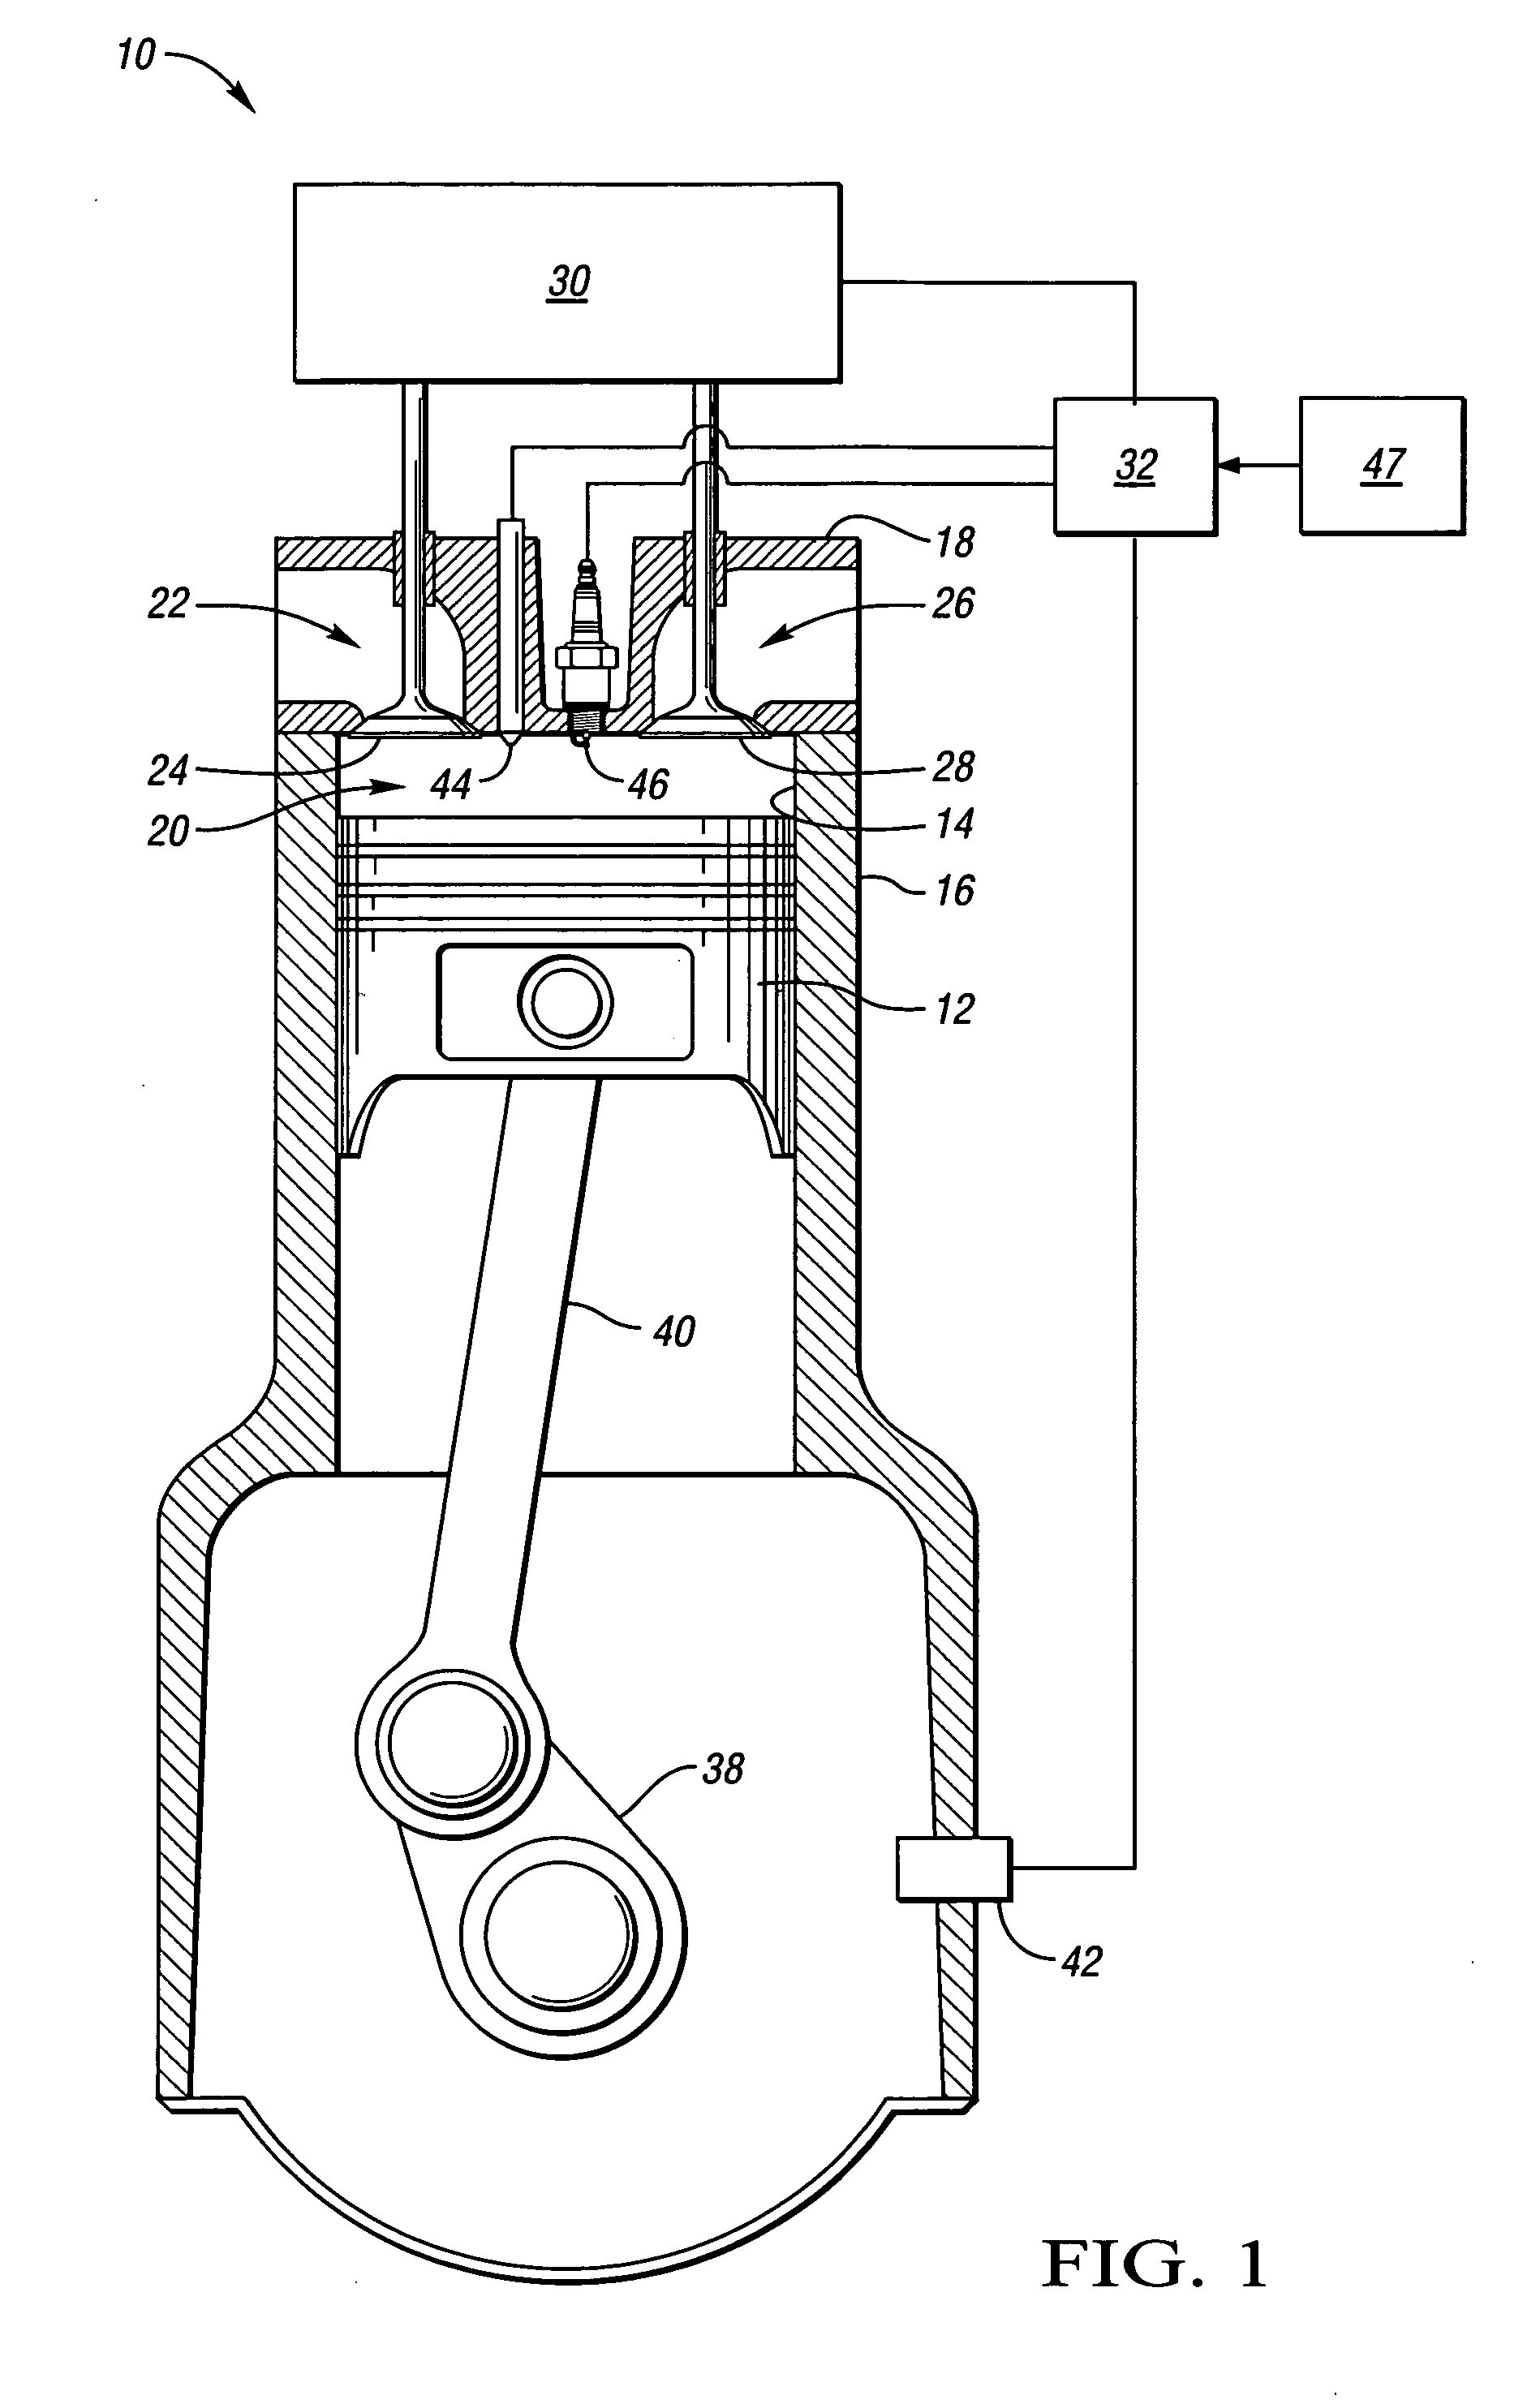 Method of HCCI and SI combustion control for a direct injection internal combustion engine